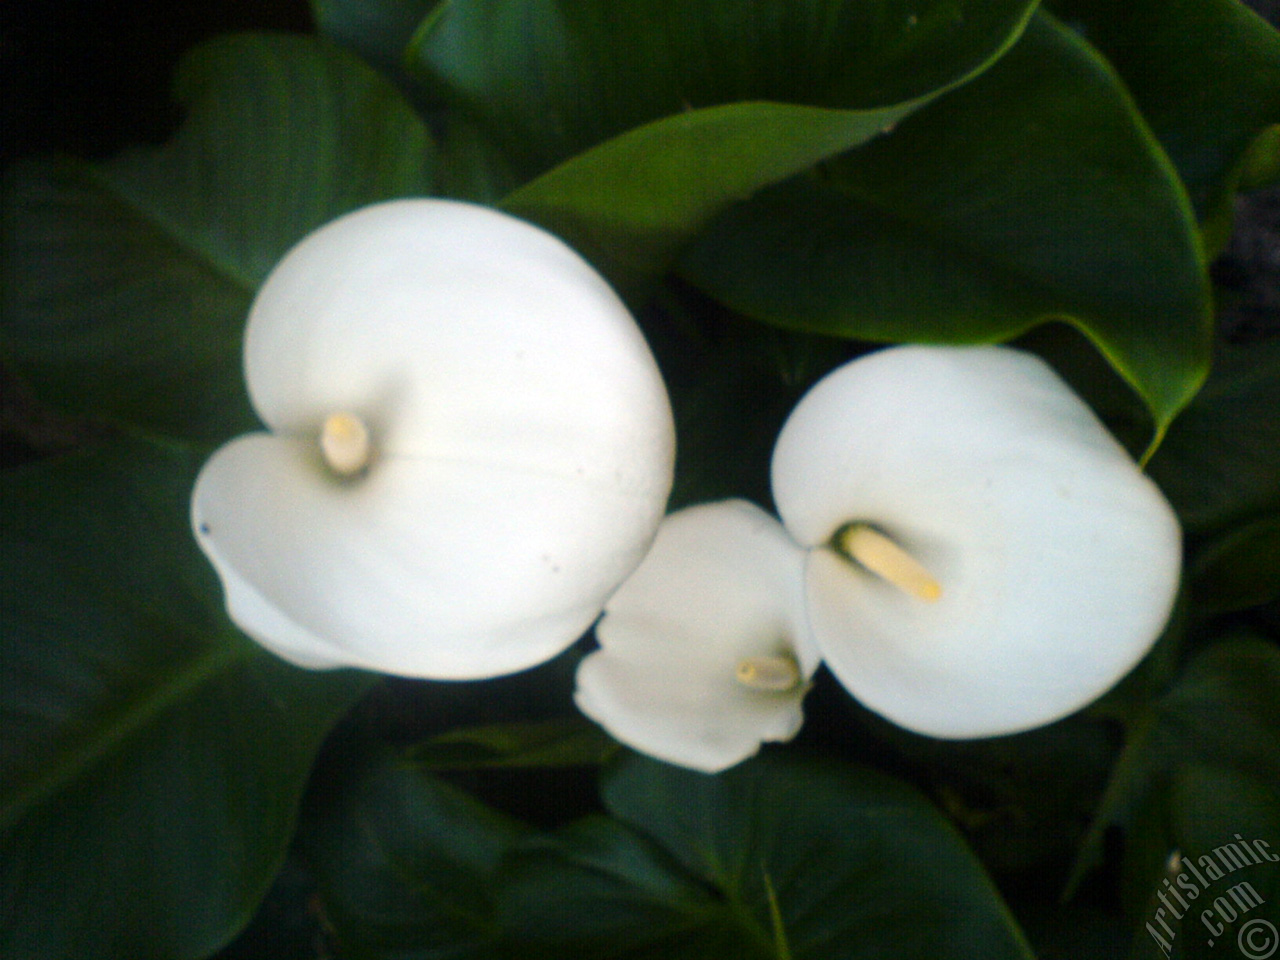 White color Arum Lily -Calla Lily- flower.
